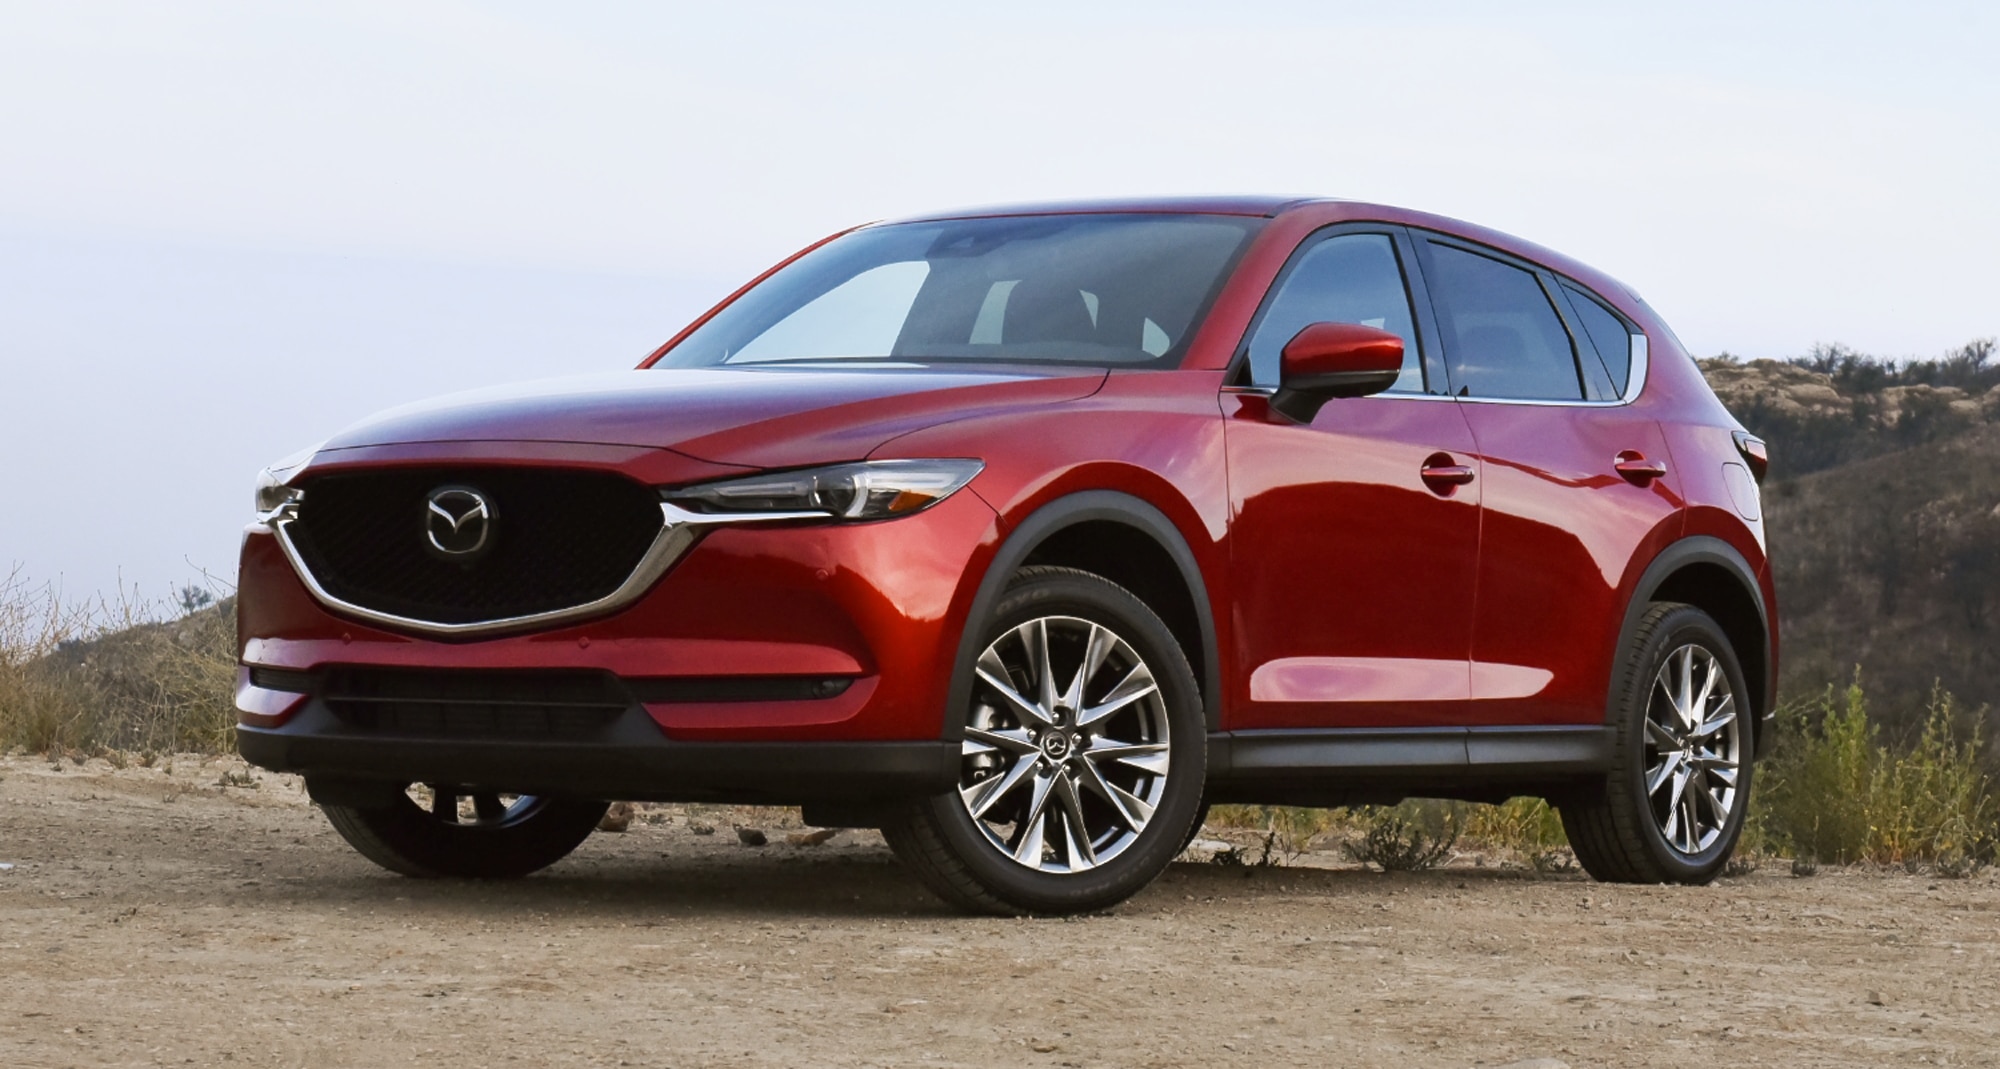 2021 Mazda CX-5 Review: Premium Without the Price